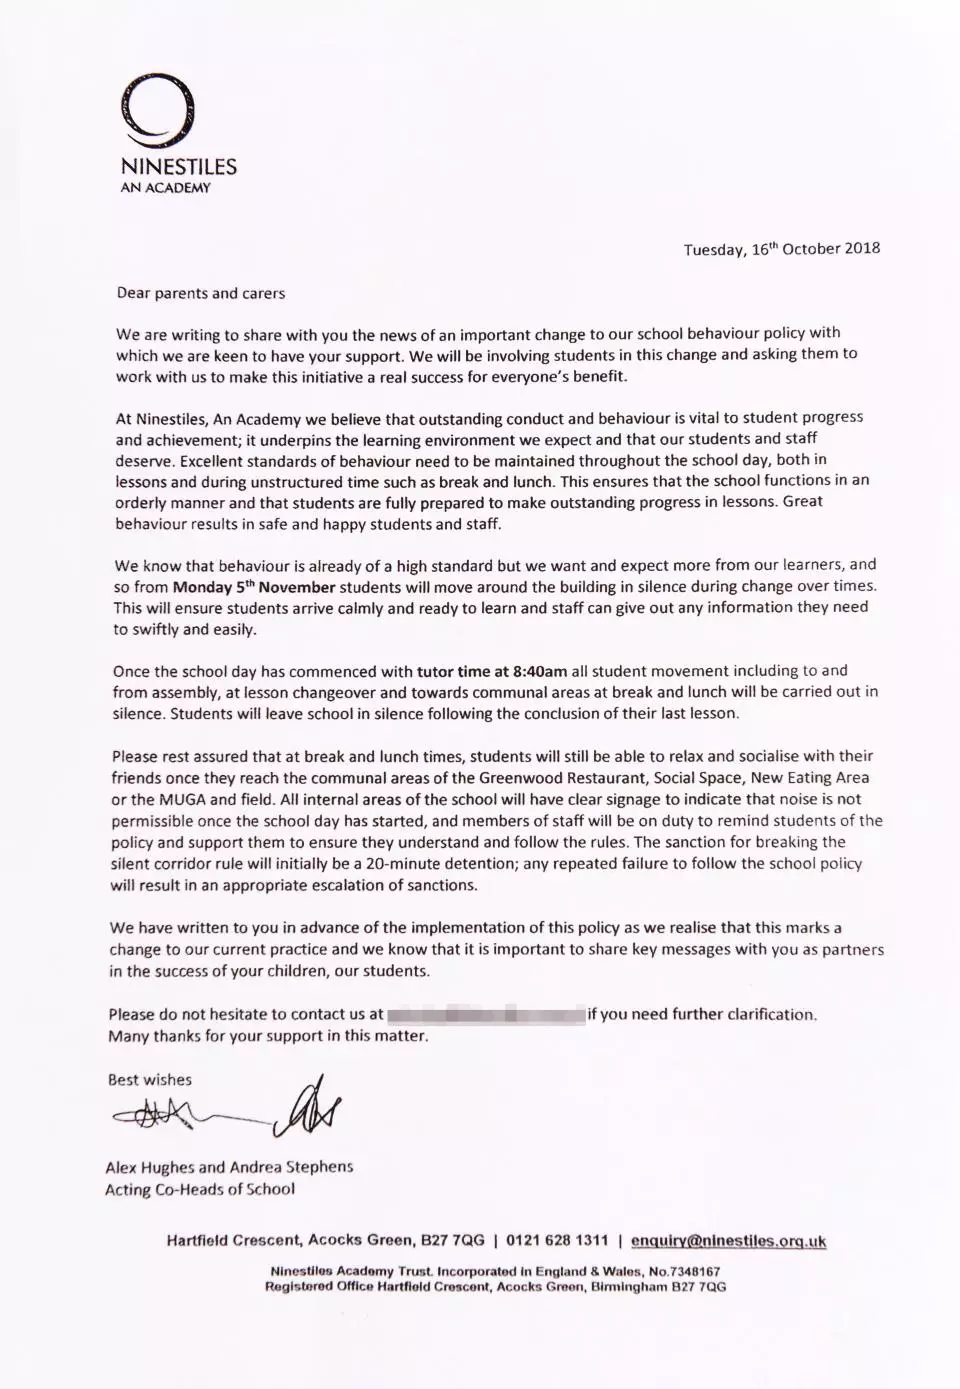 The letter explaining the school's 'no talking policy'.